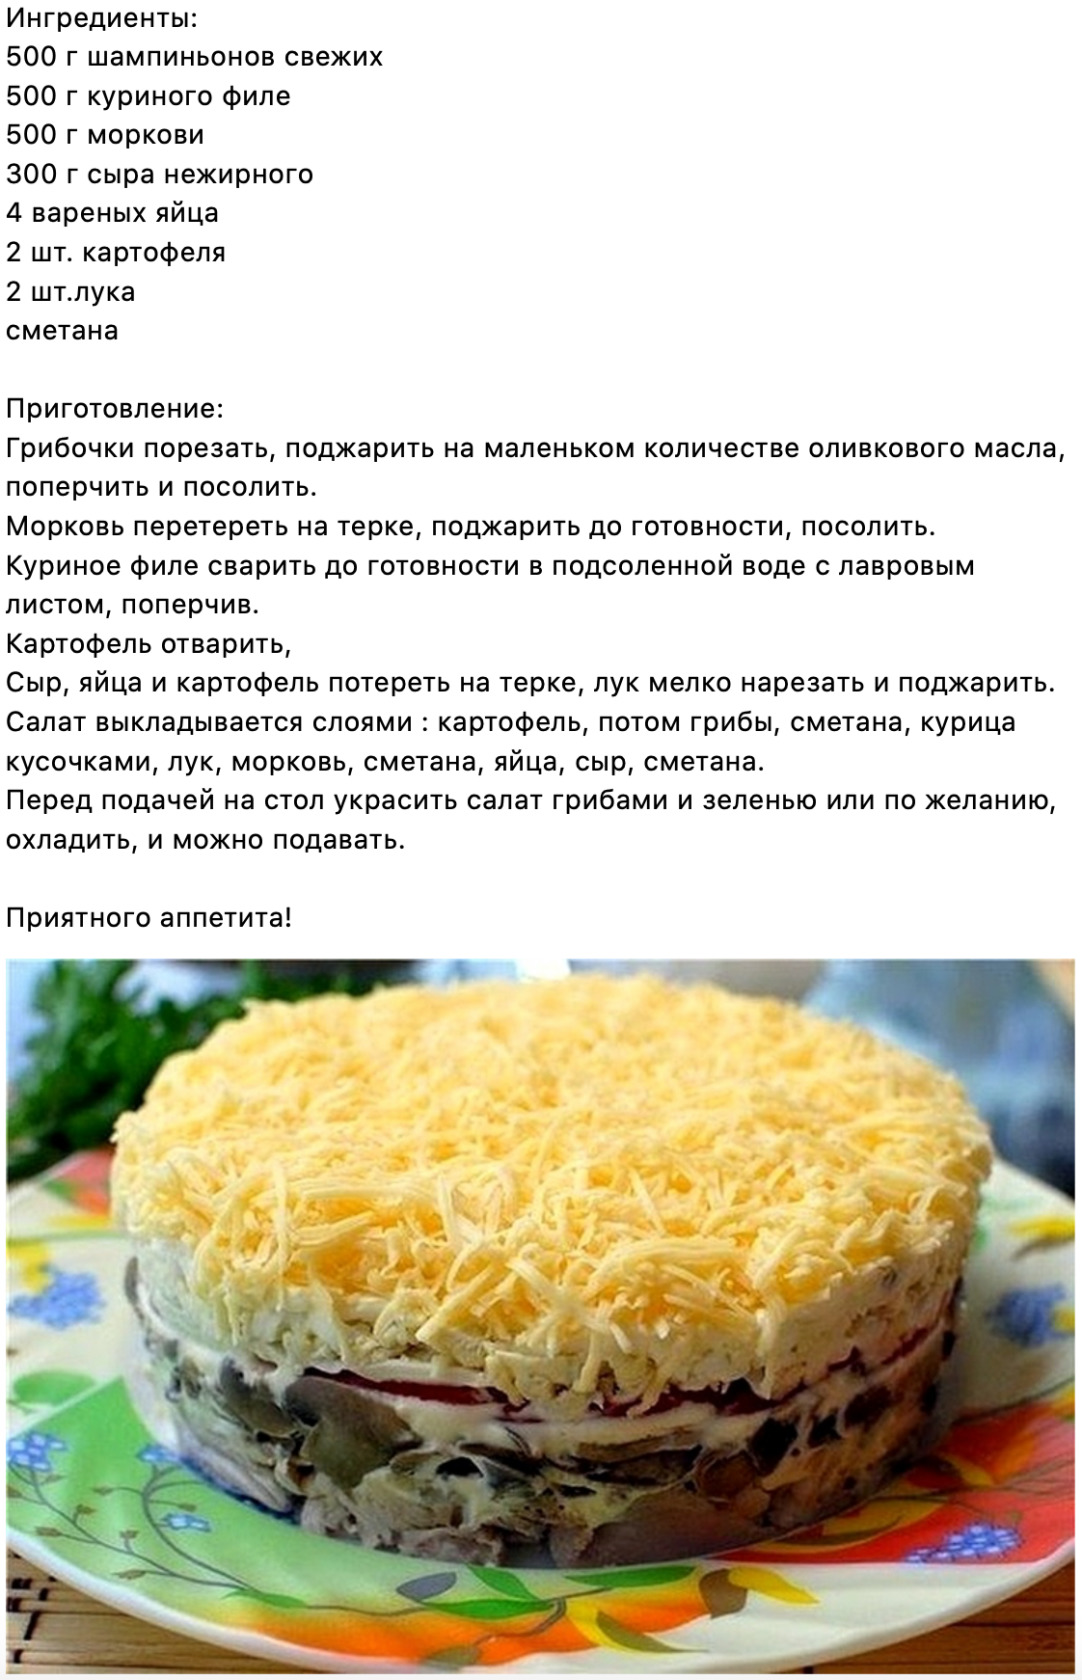 Салат тоска